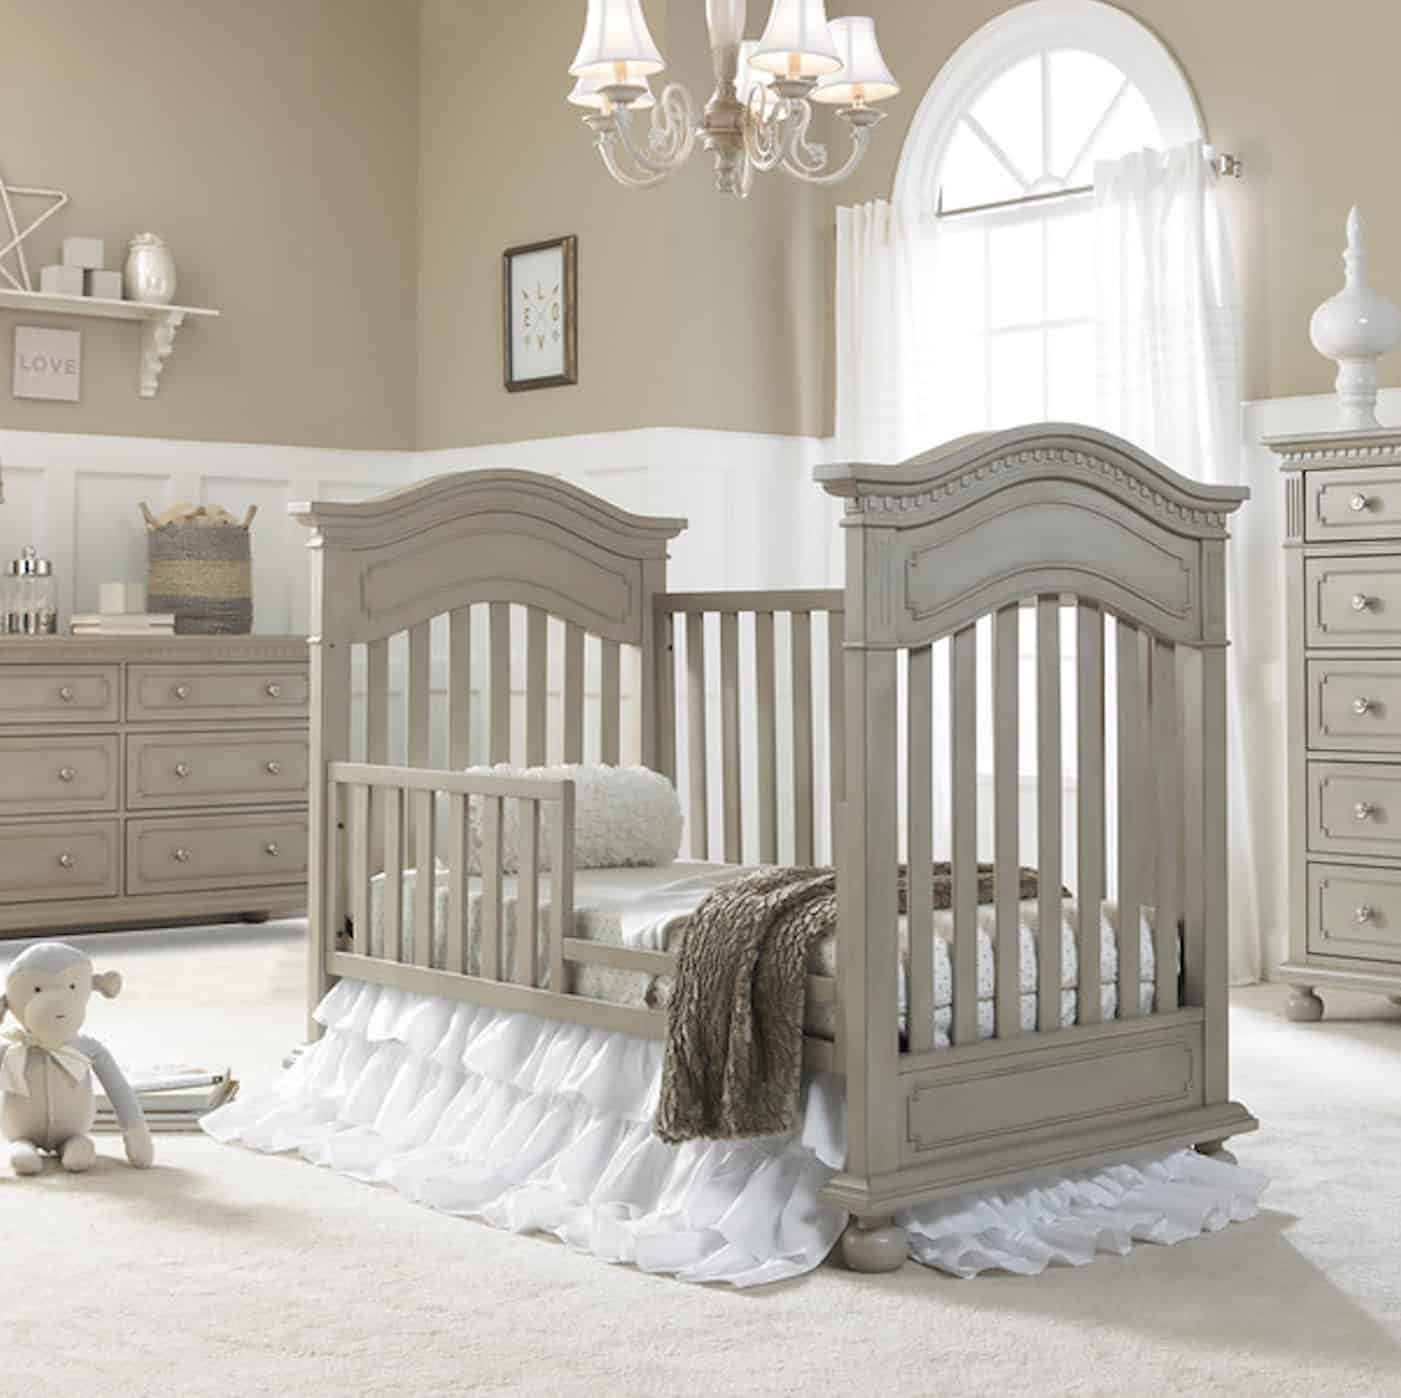 Naples Childrens Store Strollers Bunk Beds Childrens Gifts